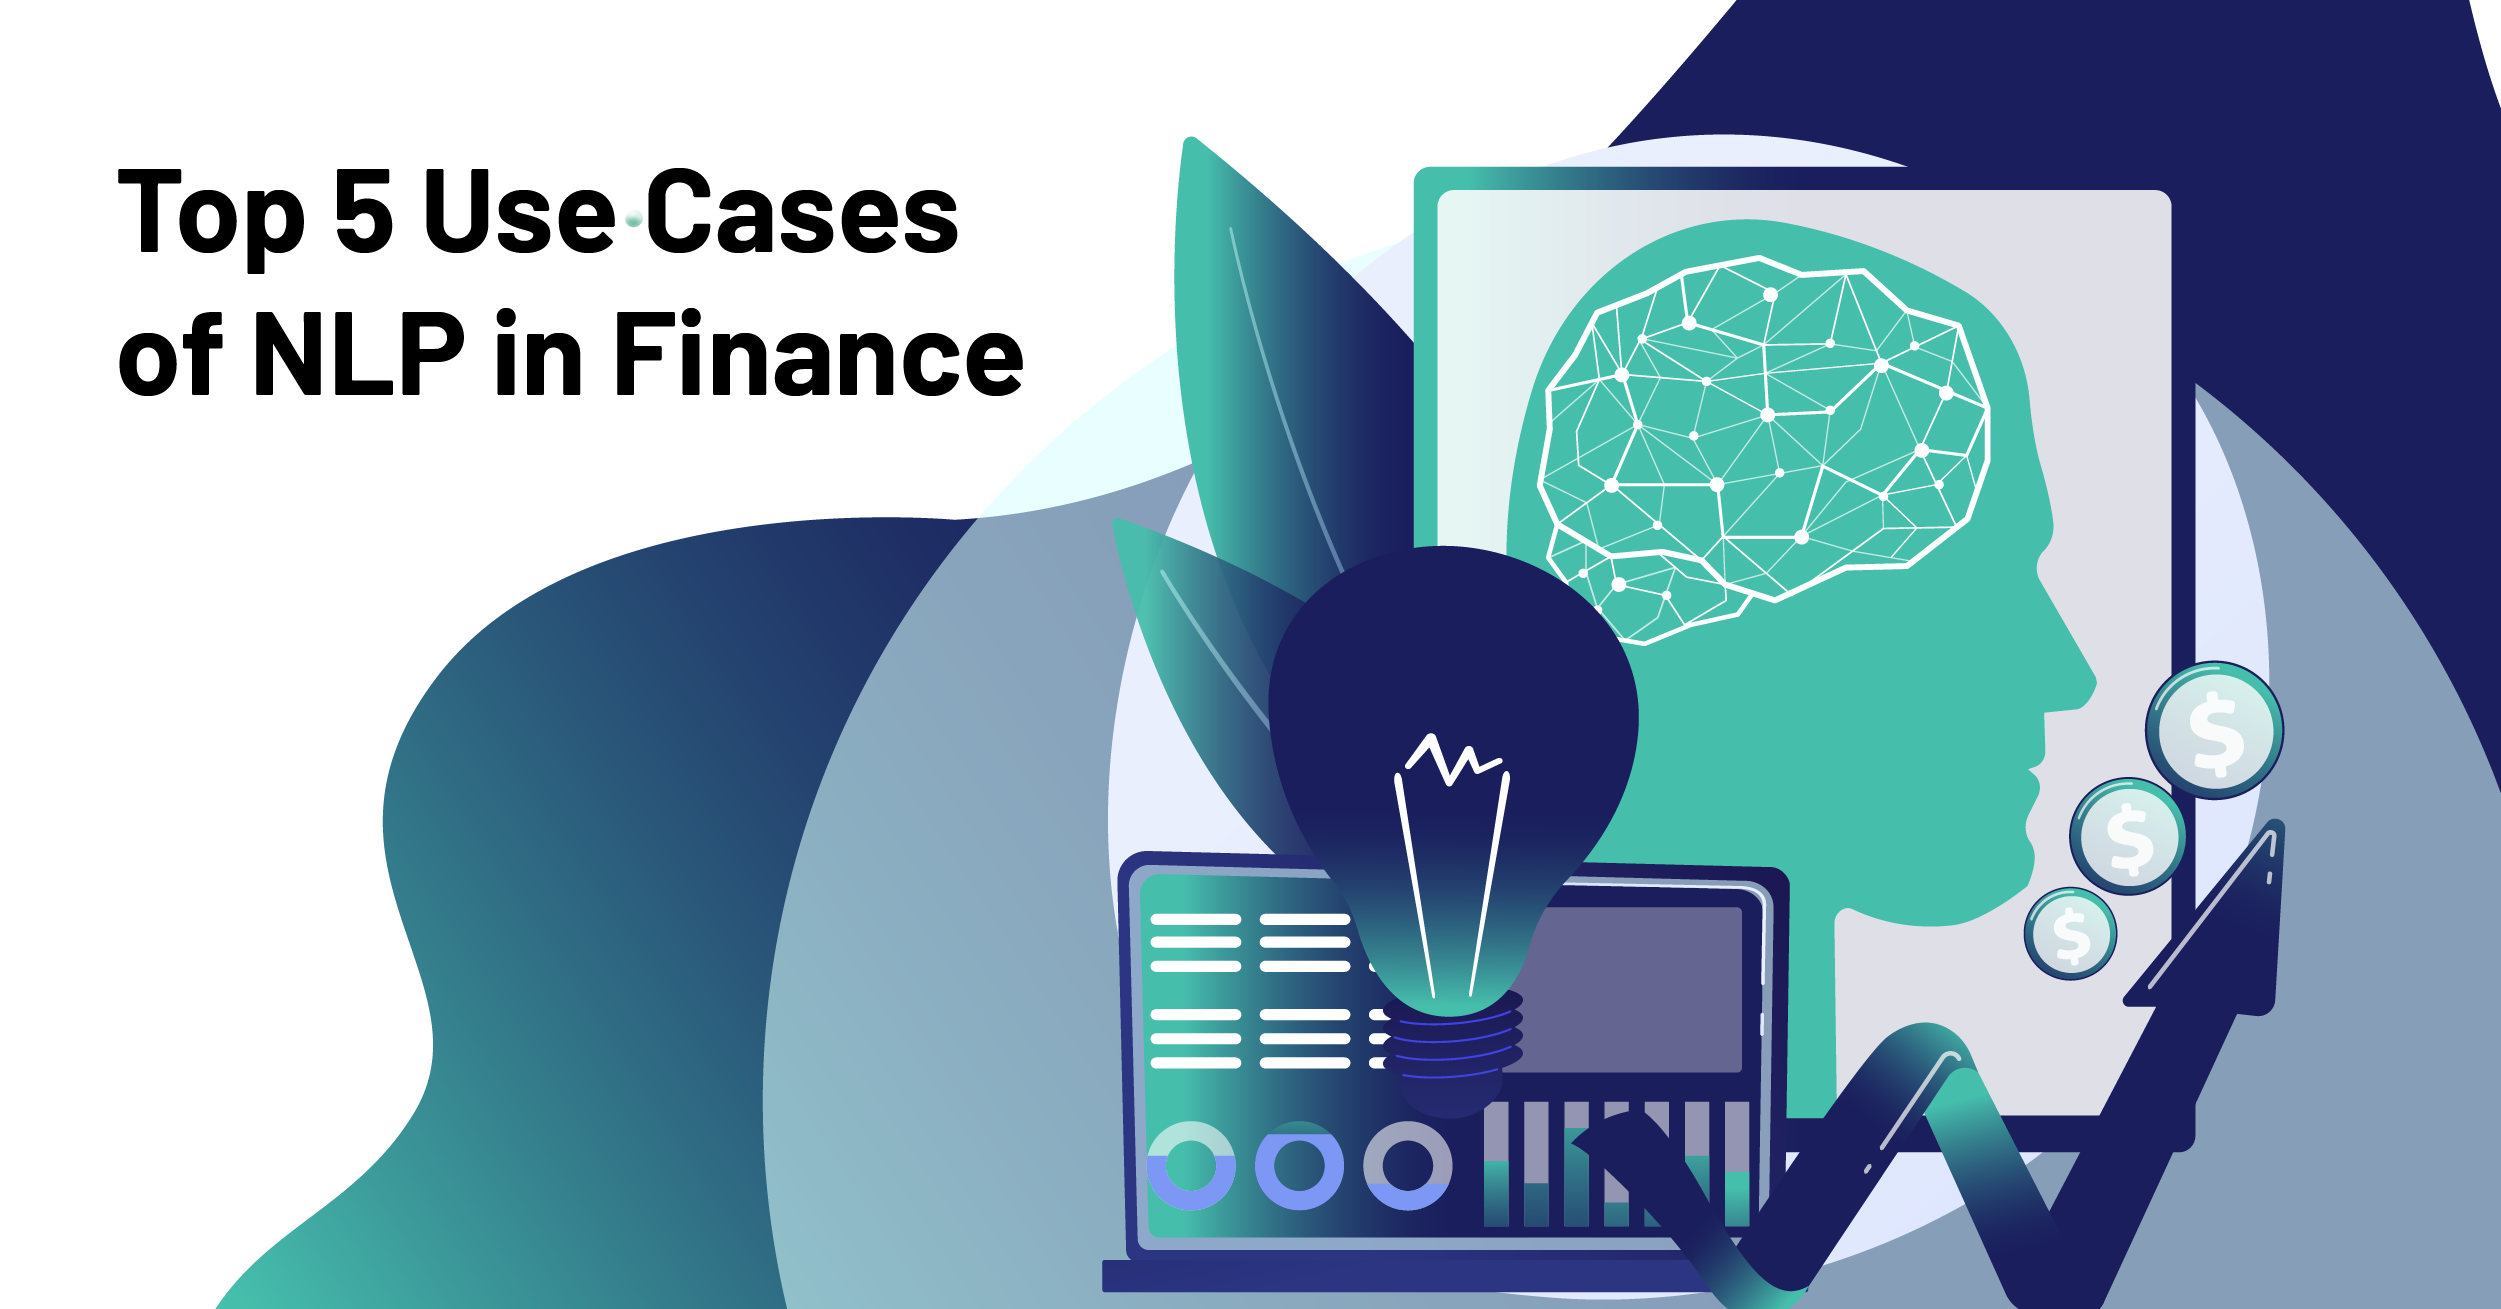 Top 5 Use Cases of NLP in Finance